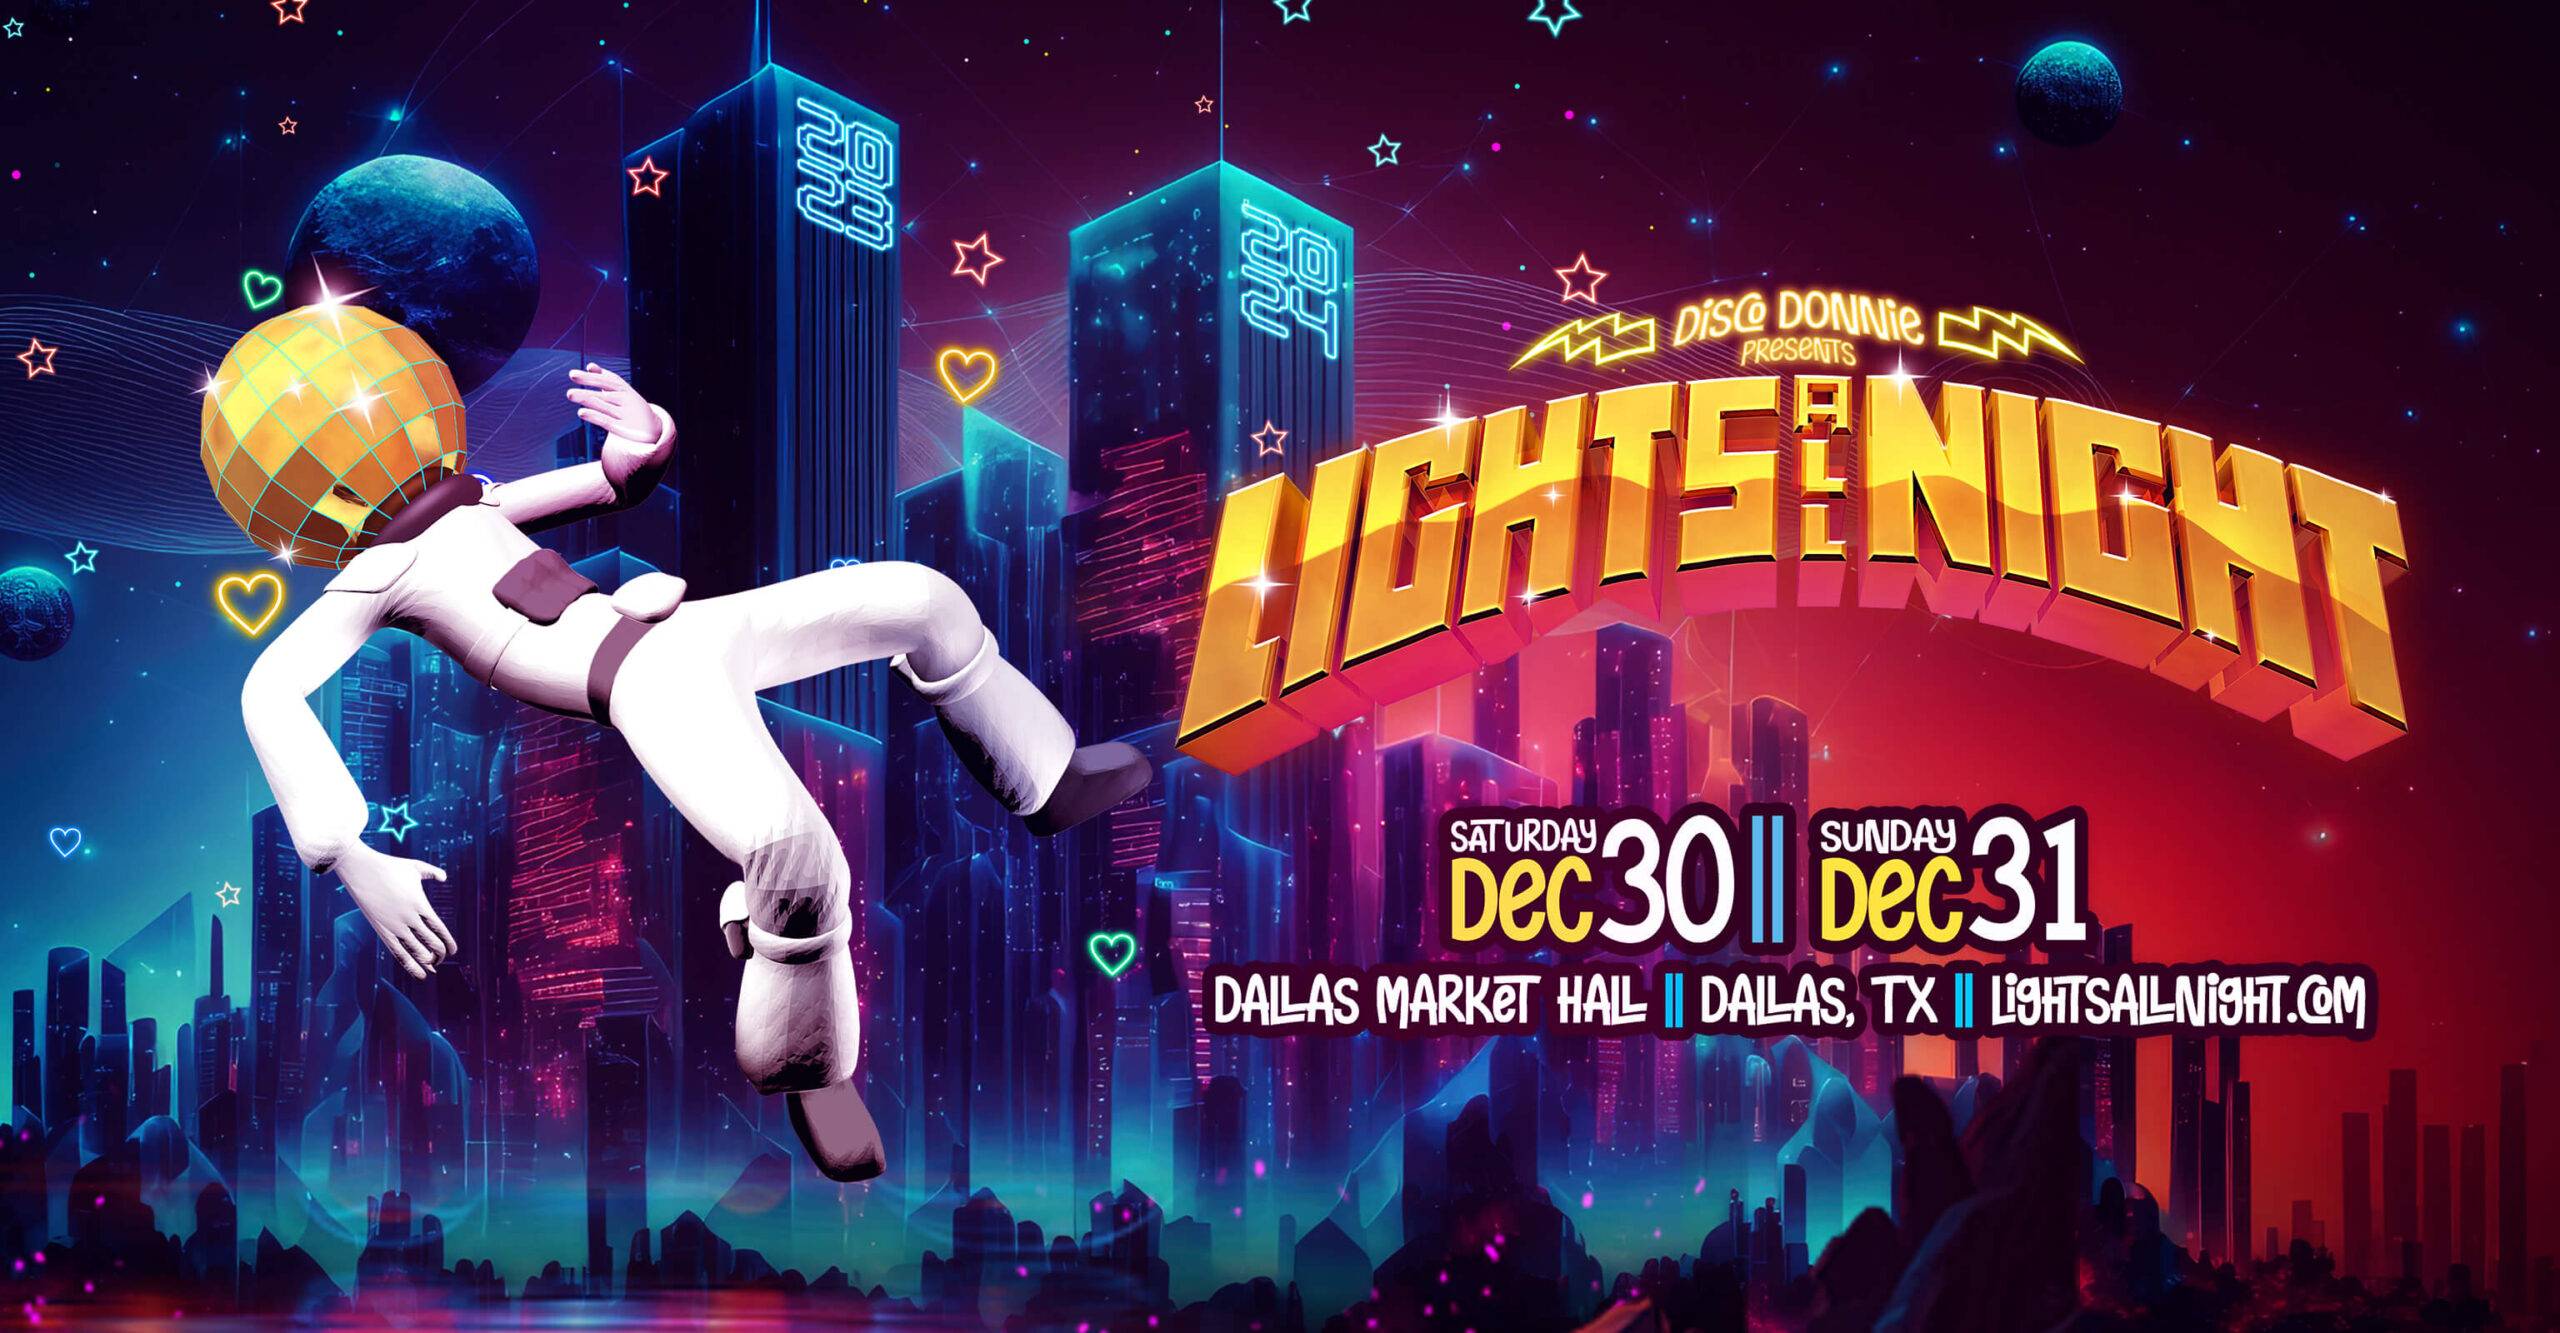 Lights All Night Dallas Promo Code, 2023, Texas, TX, Christmas, December, 2 Day Pass, Single Day Pass, VIP Pass, Tickets, Music, Venue, The Dallas Market Hall